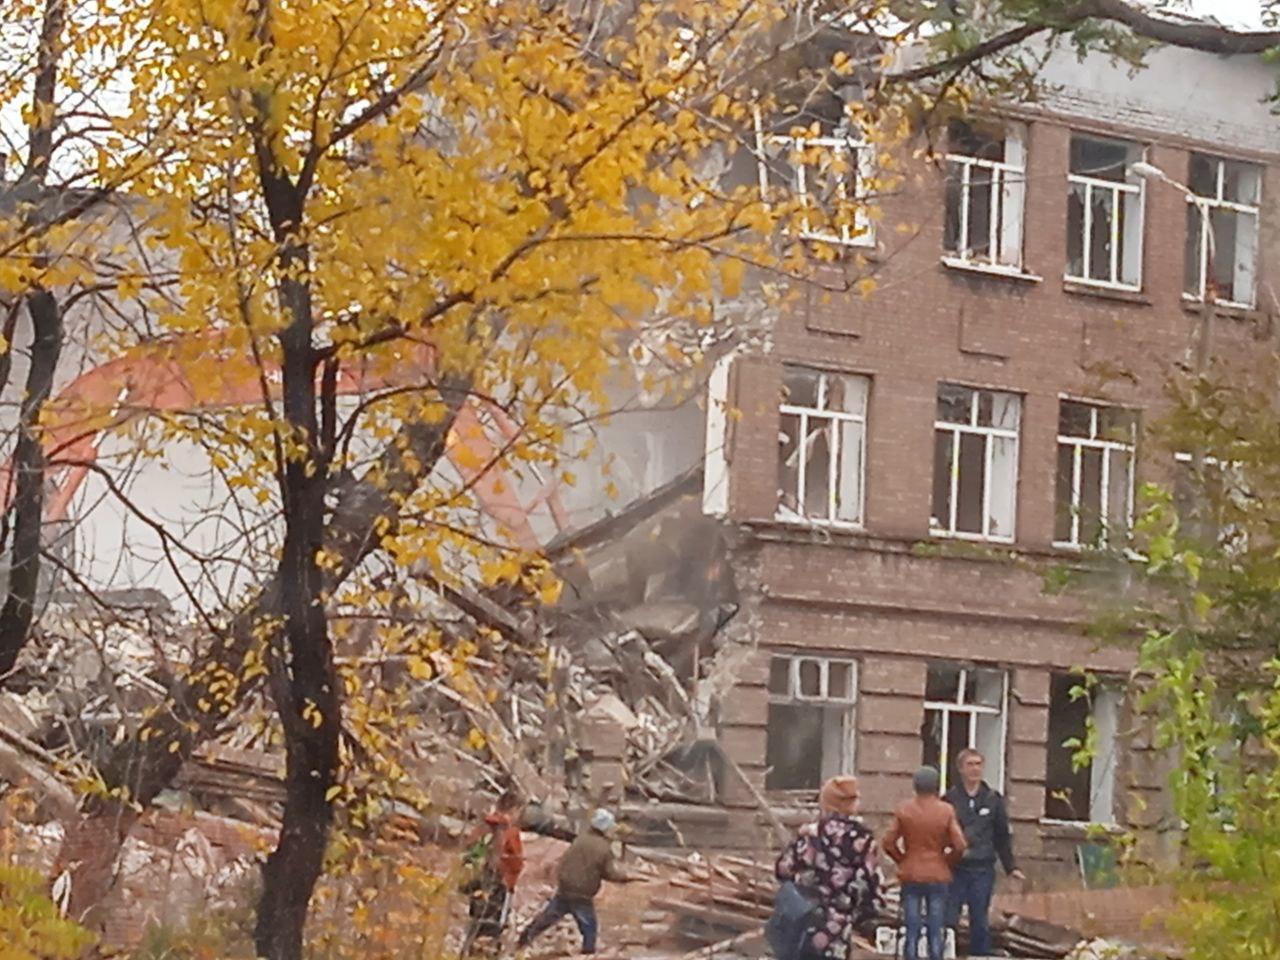 The occupiers in Mariupol demolish the surviving buildings: "They are trying to erase the traces of their war crimes"